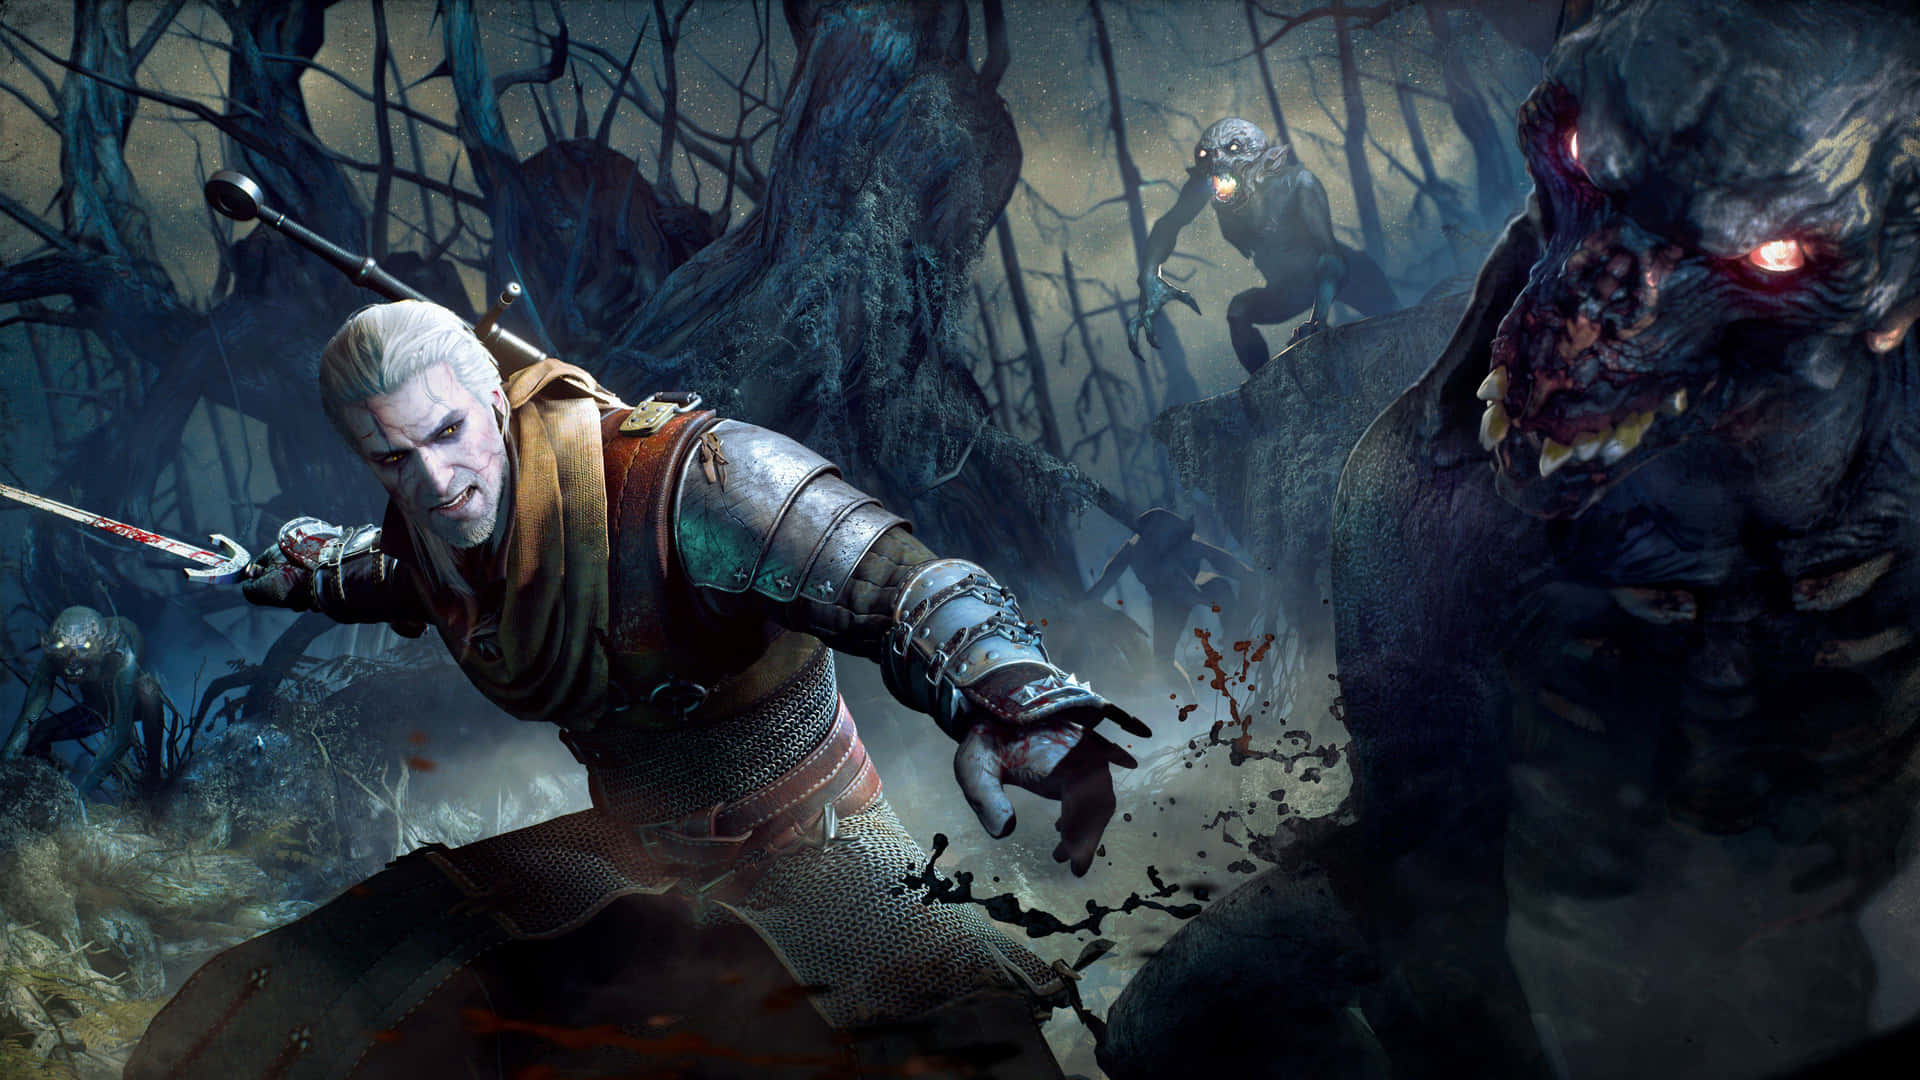 Geralt of Rivia, the Witcher, exploring a mysterious forest in an epic fantasy world.